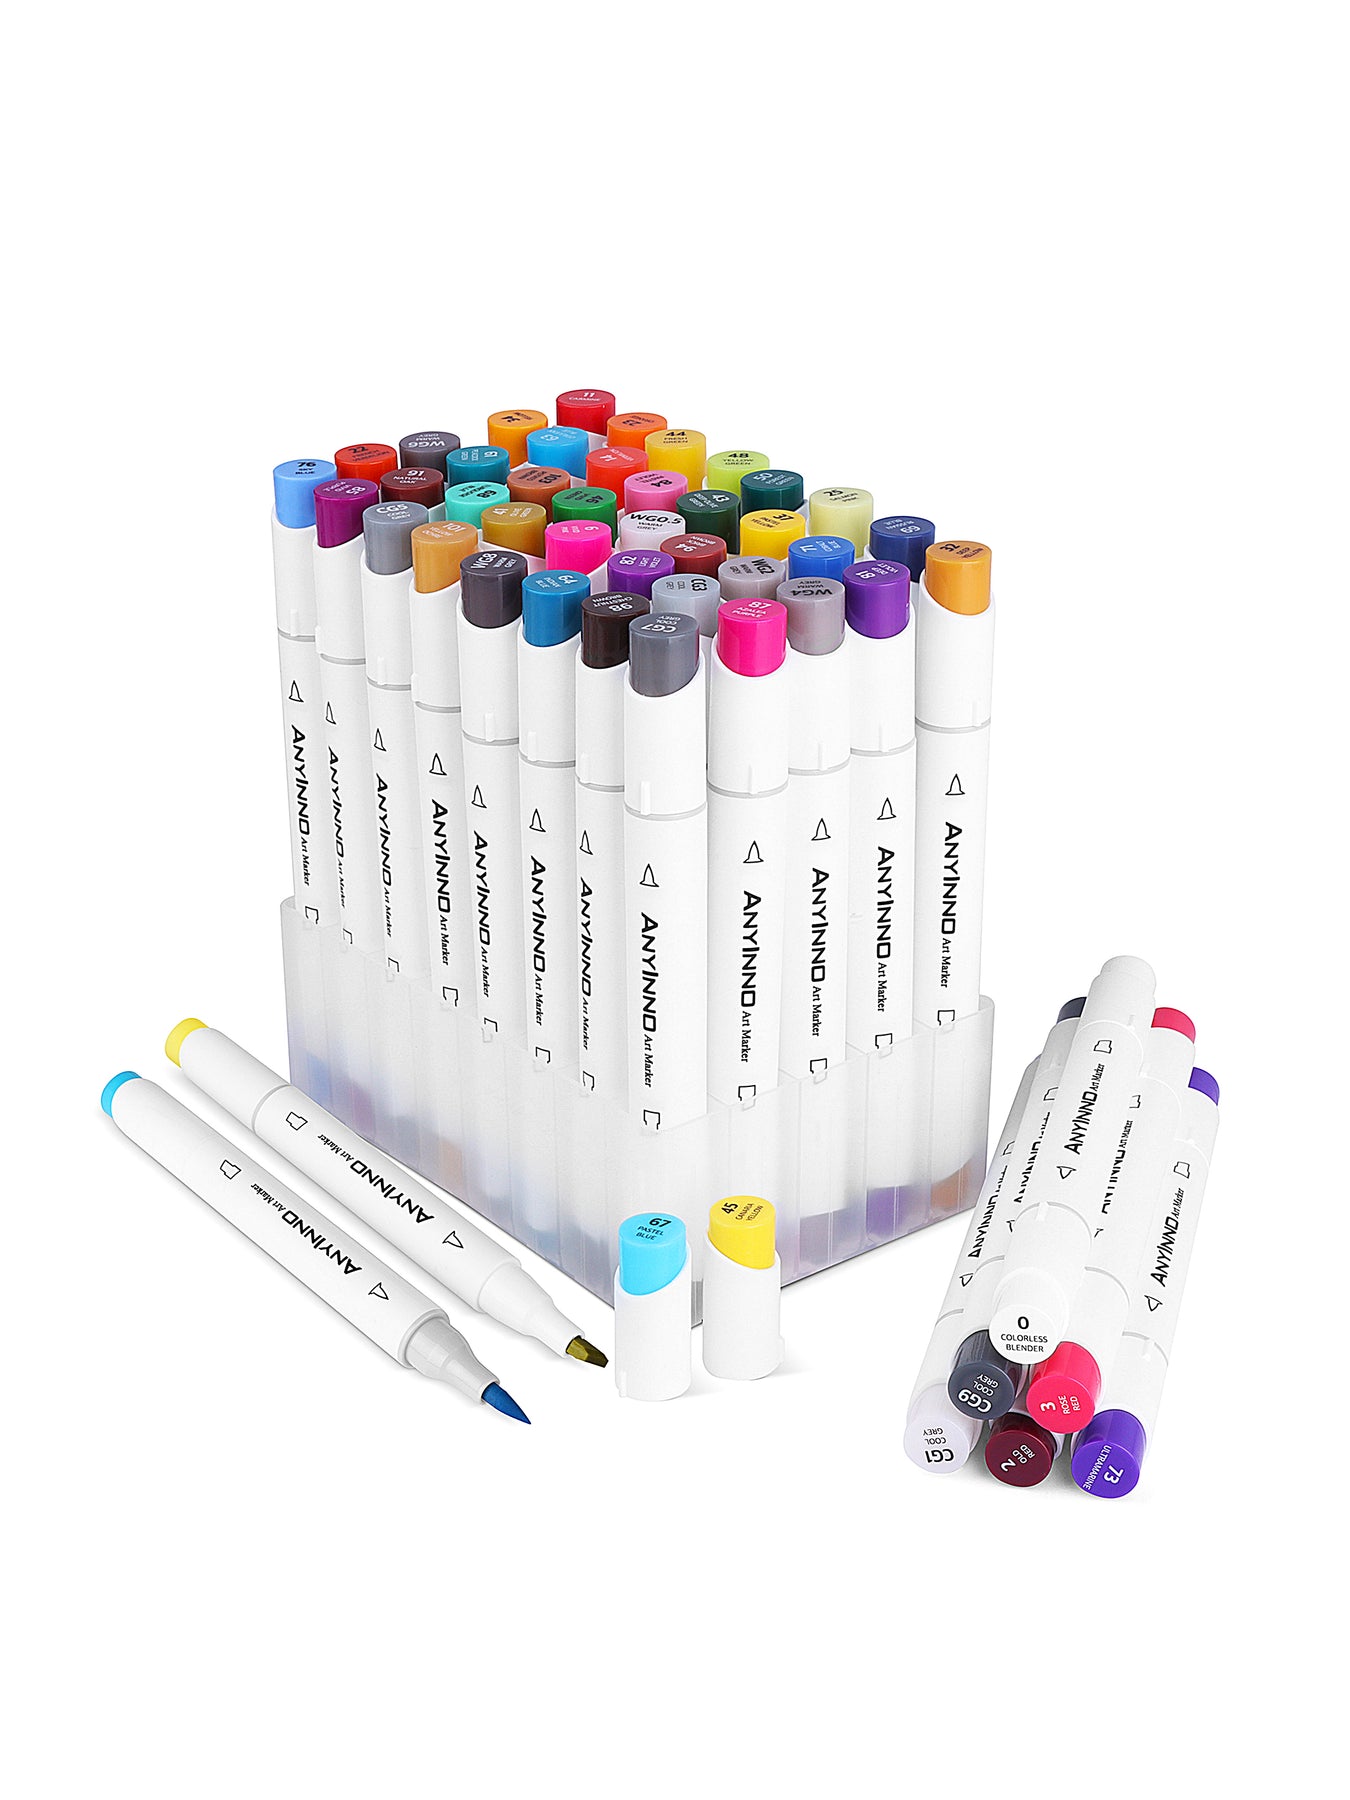 Alcohol-based Dual Tip Art Markers, Dual Tip Art Markers, Art Marker Set,  Alcohol Sketch Markers -  Denmark